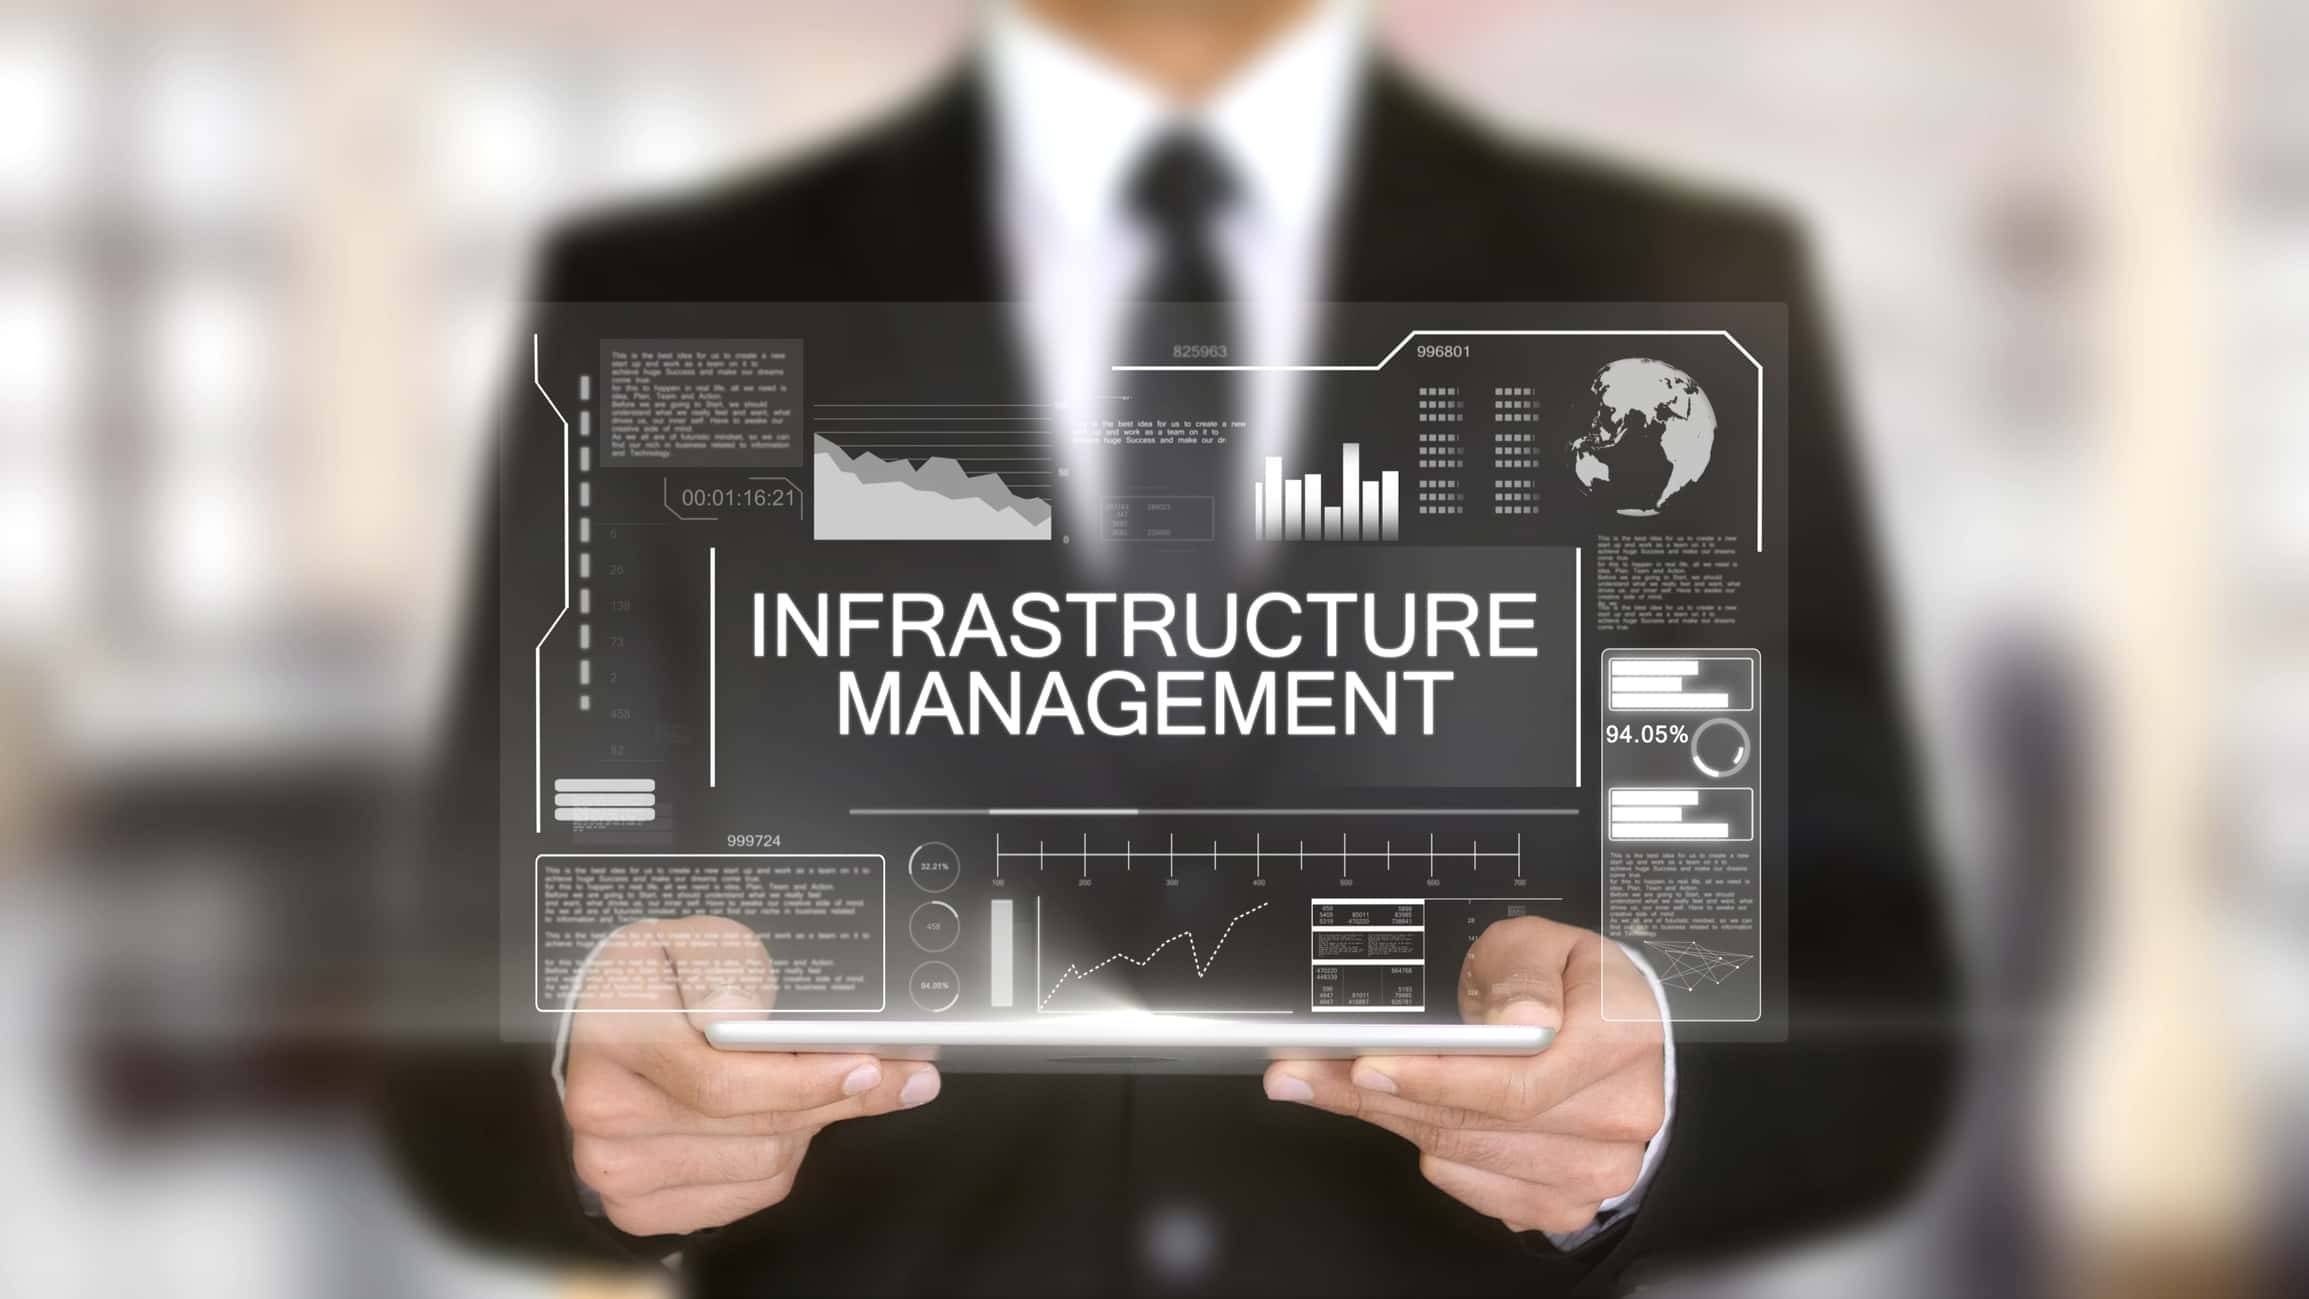 infrastructure-management-hologram-futuristic-interface-augmented-virtual